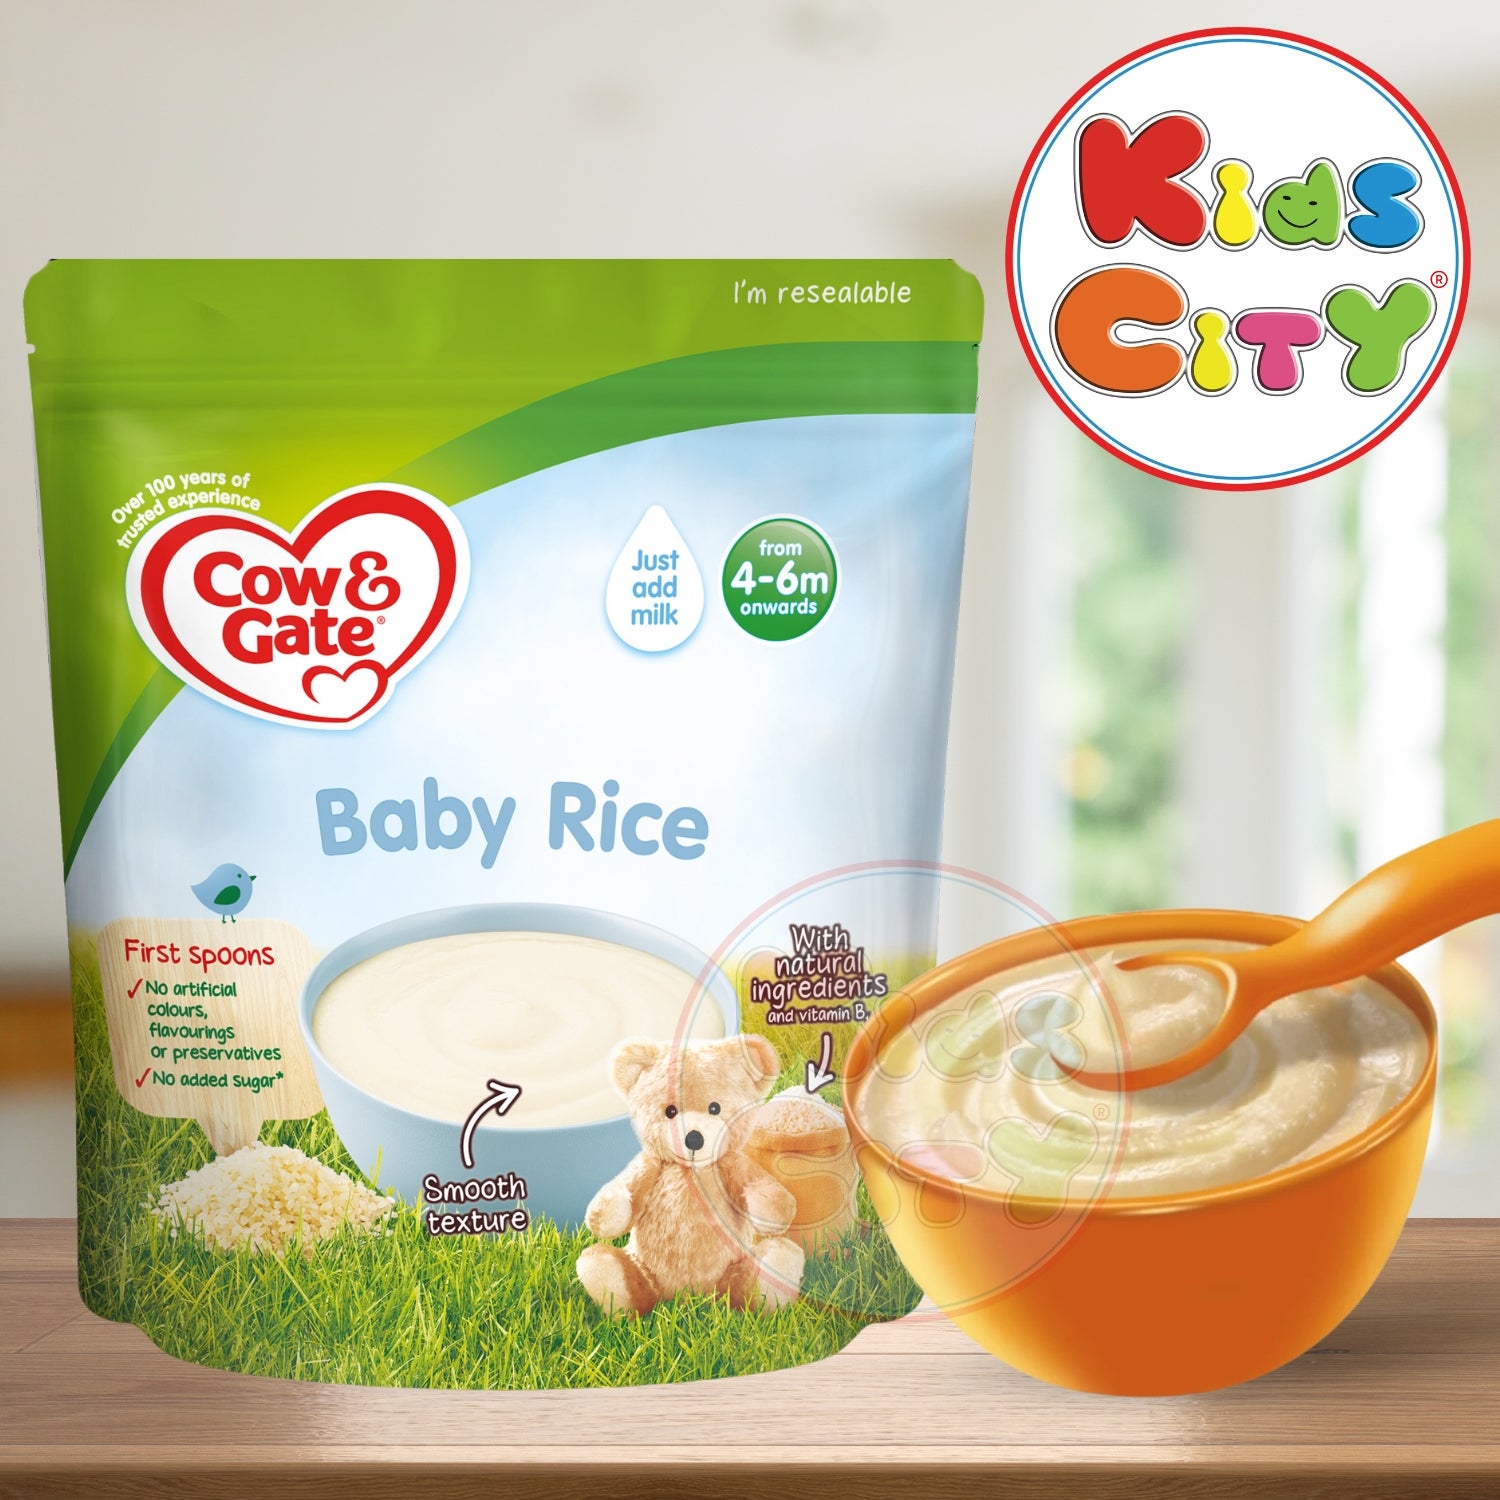 Cow & Gate Baby Rice (4-6m+) - 100g